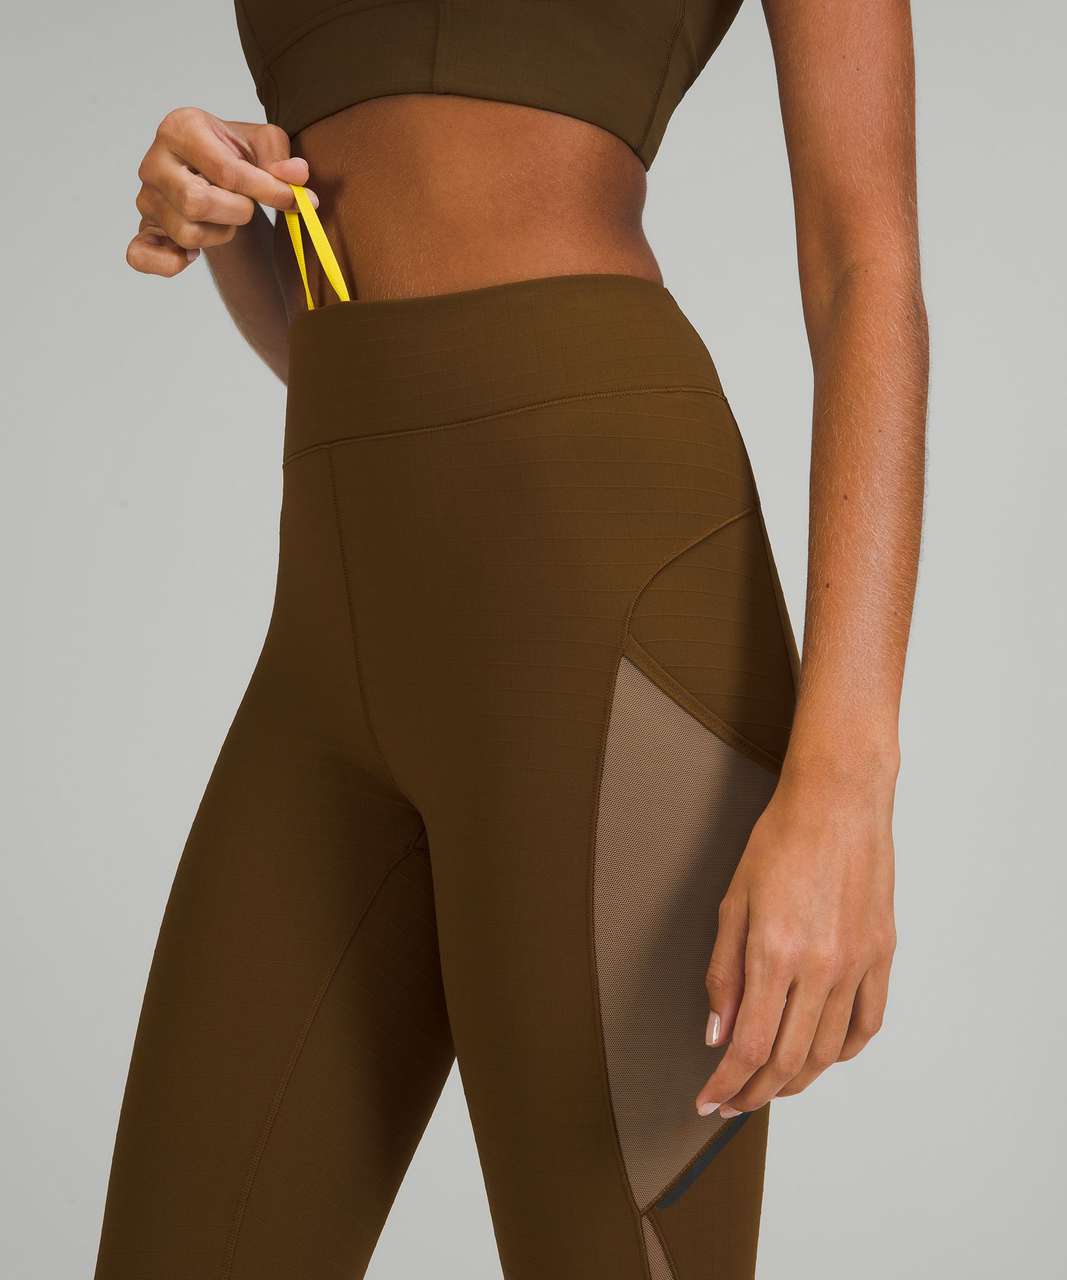 lululemon lab *special edition high waisted cotton yoga tights